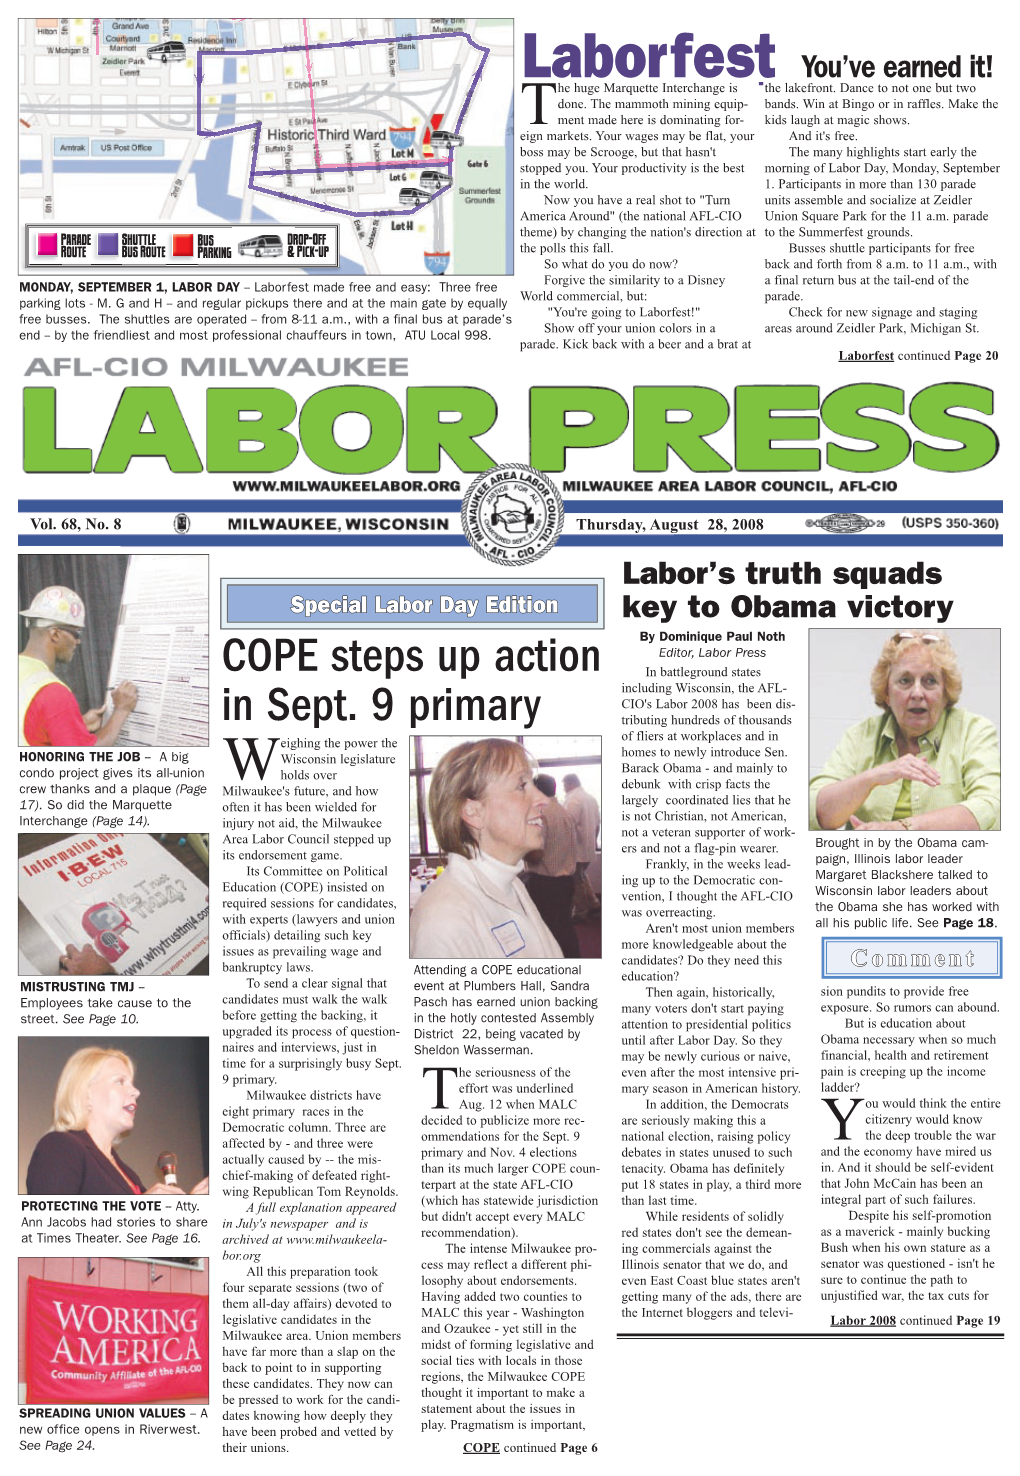 COPE Steps up Action in Sept. 9 Primary